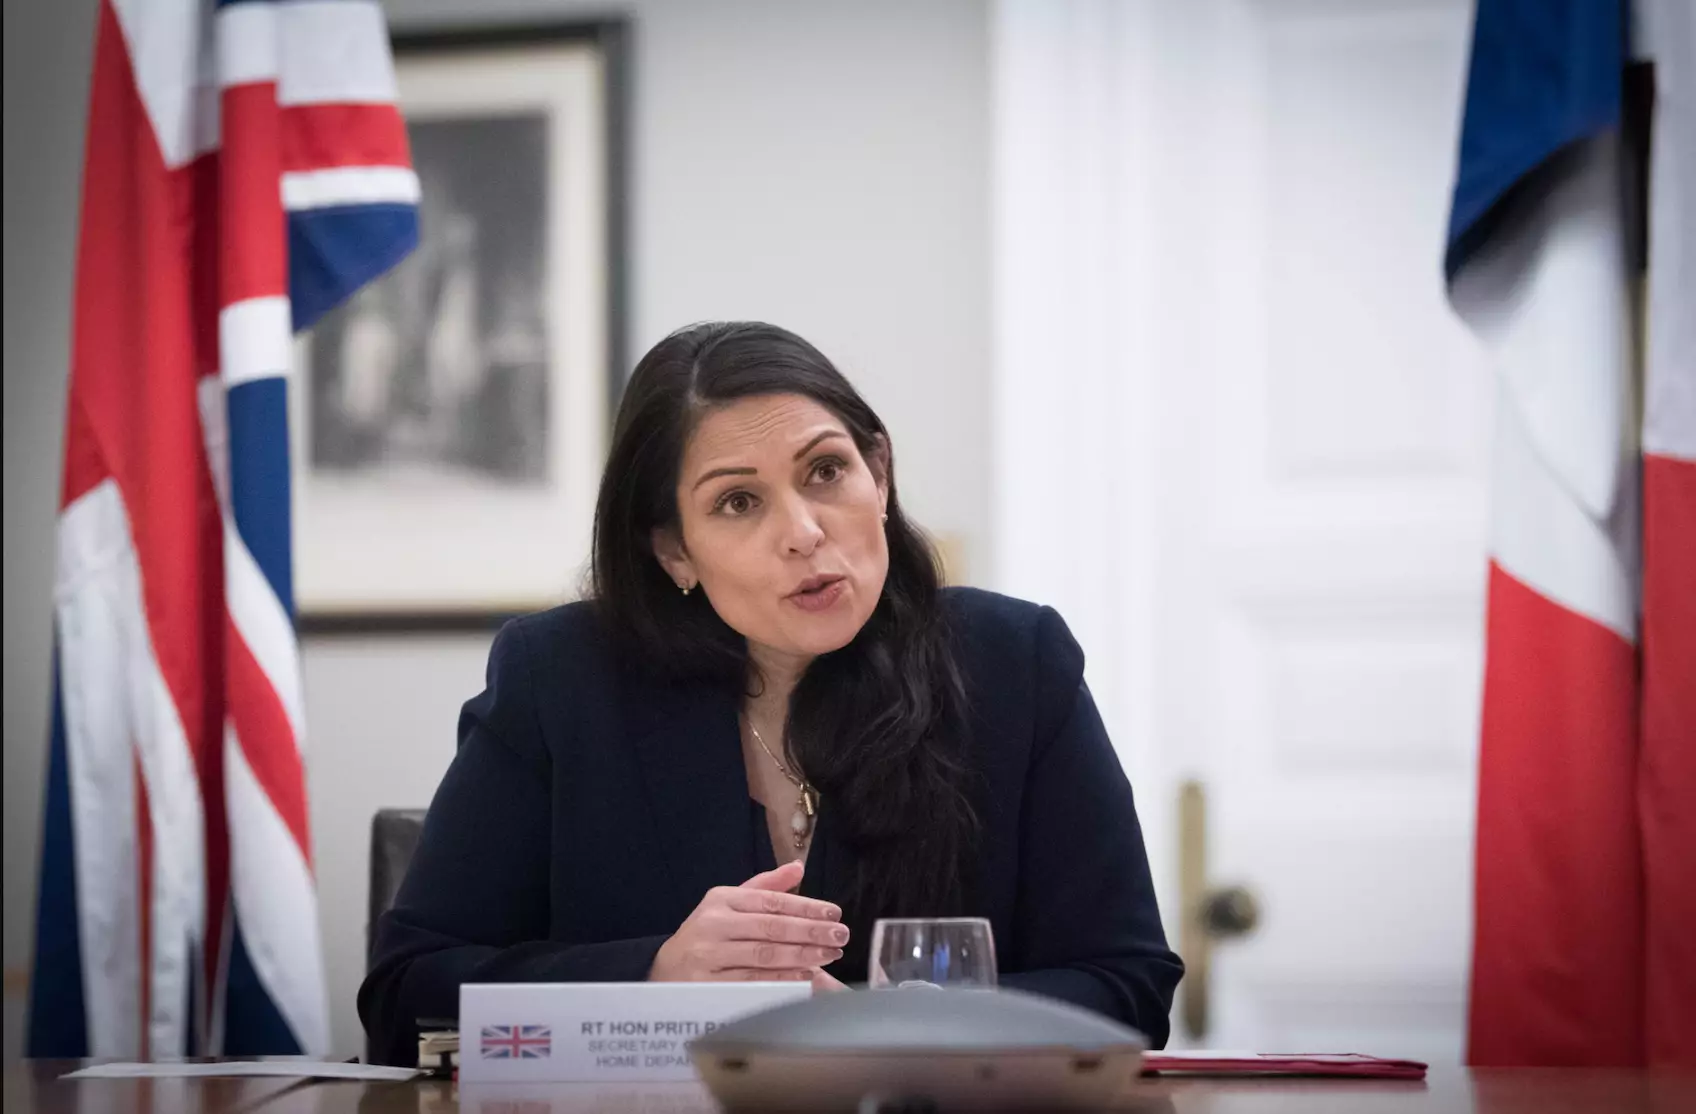 Priti Patel confirmed the restrictions during an interview with BBC Radio 4's Today programme (